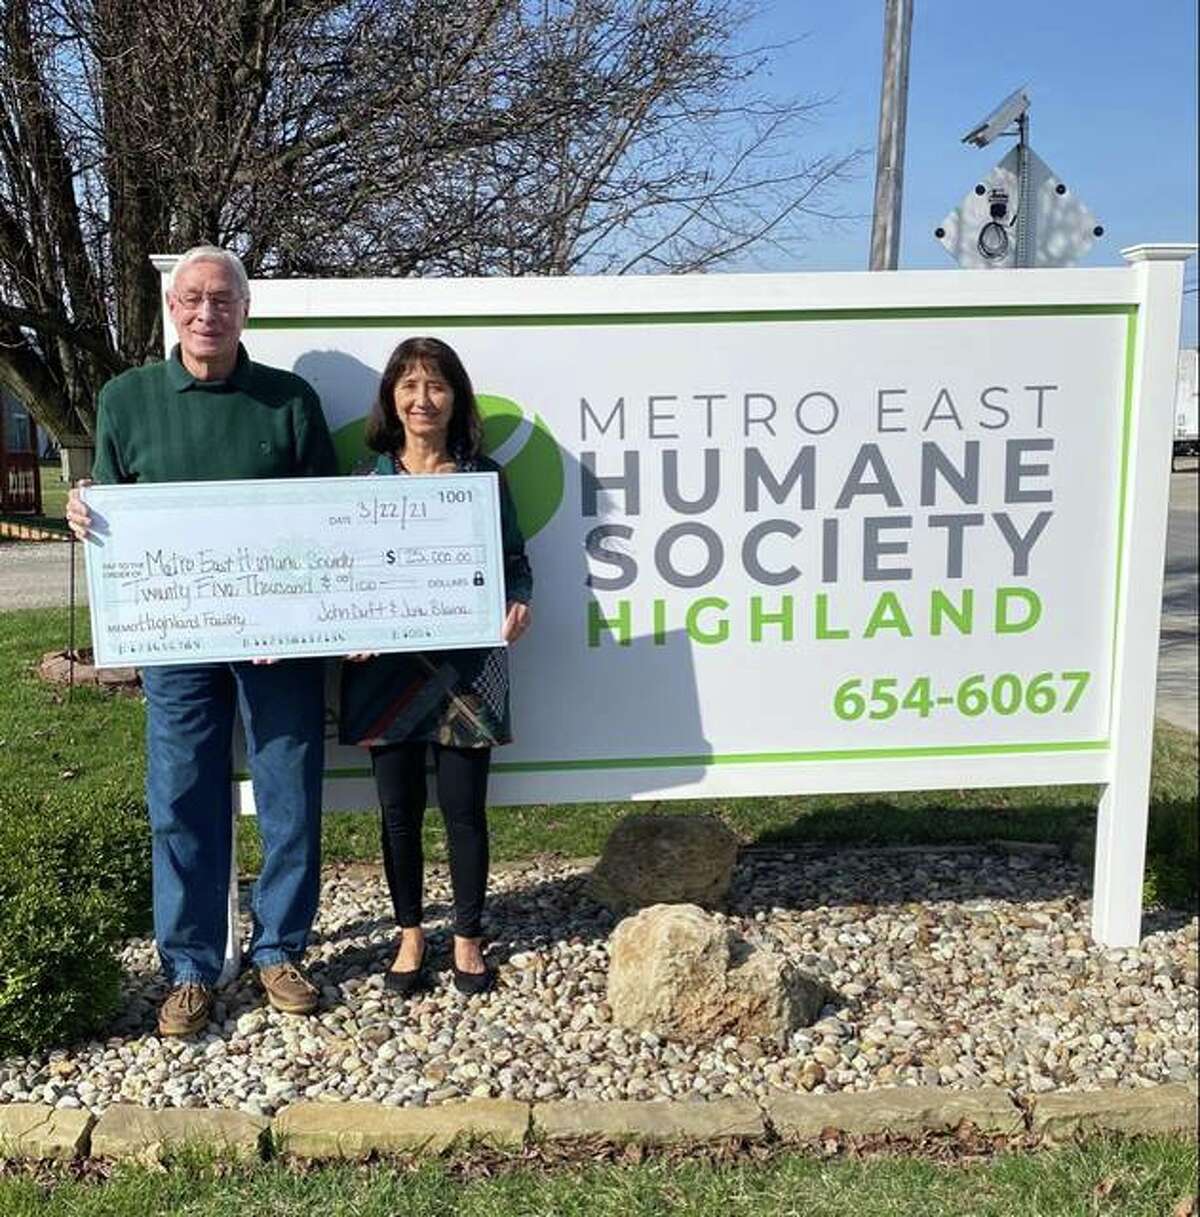 John Duft and June Blaine of Highland kickstarted the Metro East Humane Society’s $175,000 capital campaign for its Highland and Edwardsville facilities. Purina also has donated $10,000 to the campaign.